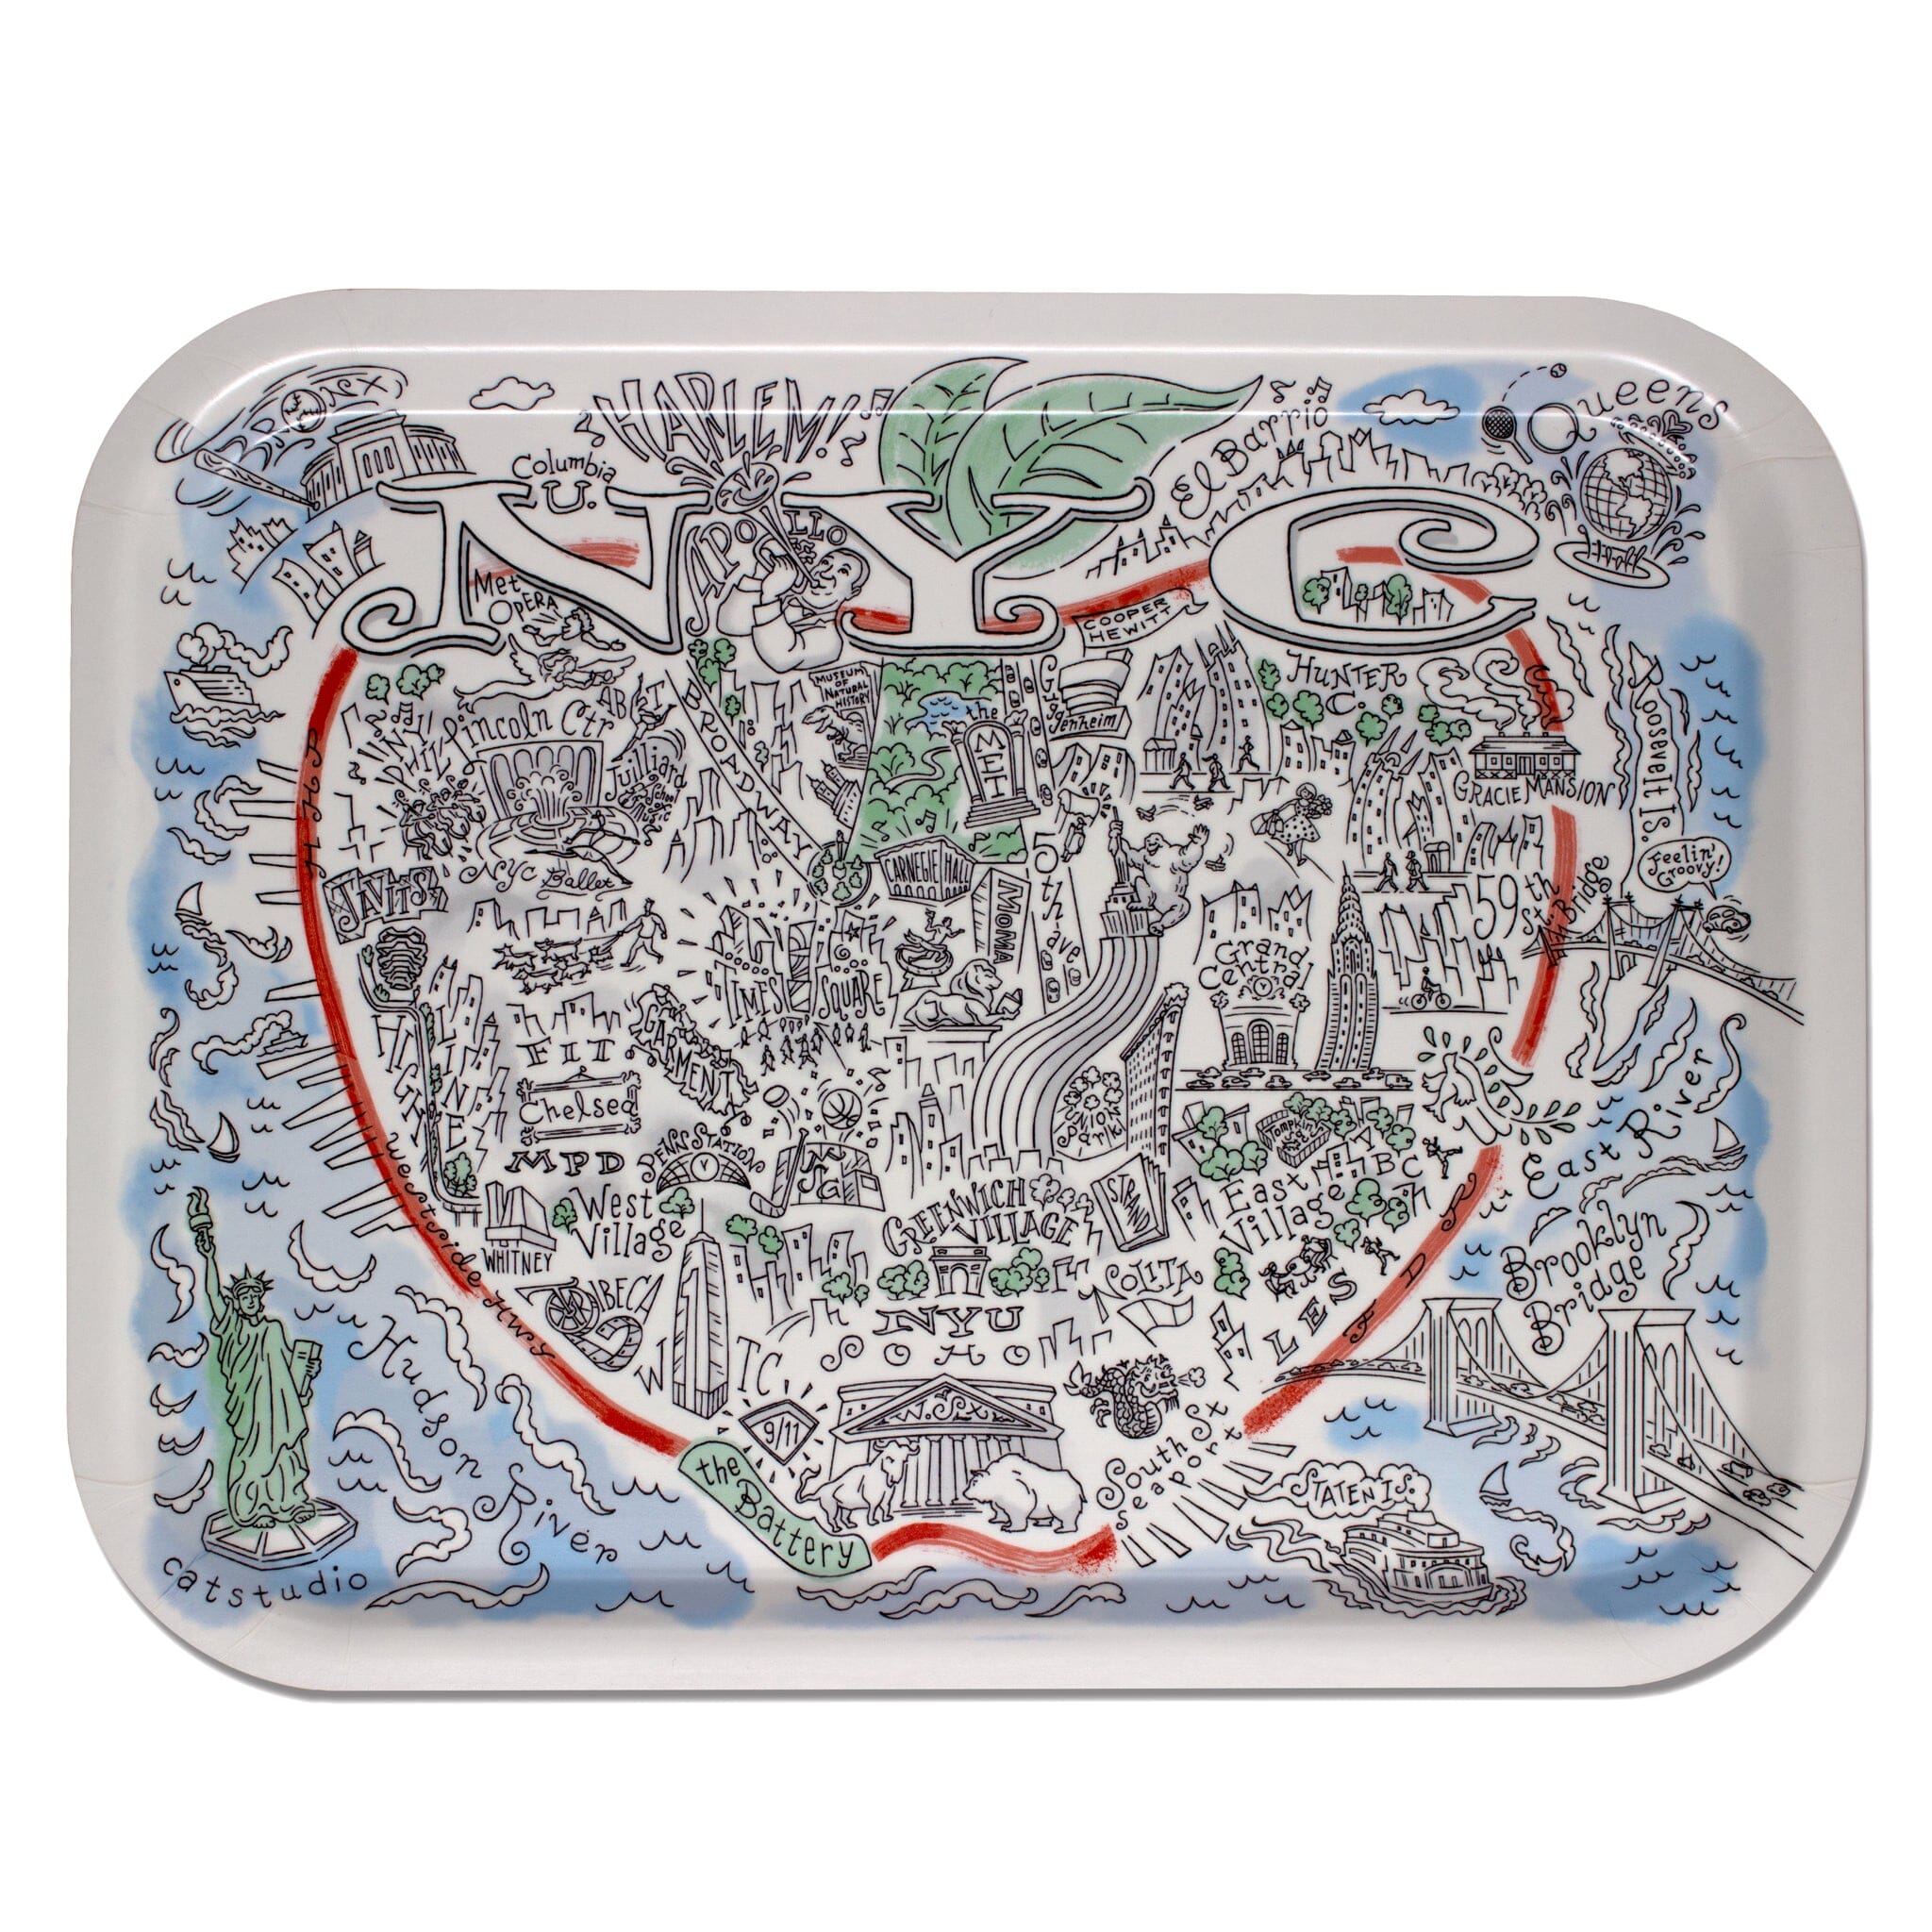 Shop the Vintage Ski Patches Birch Tray at Weston Table